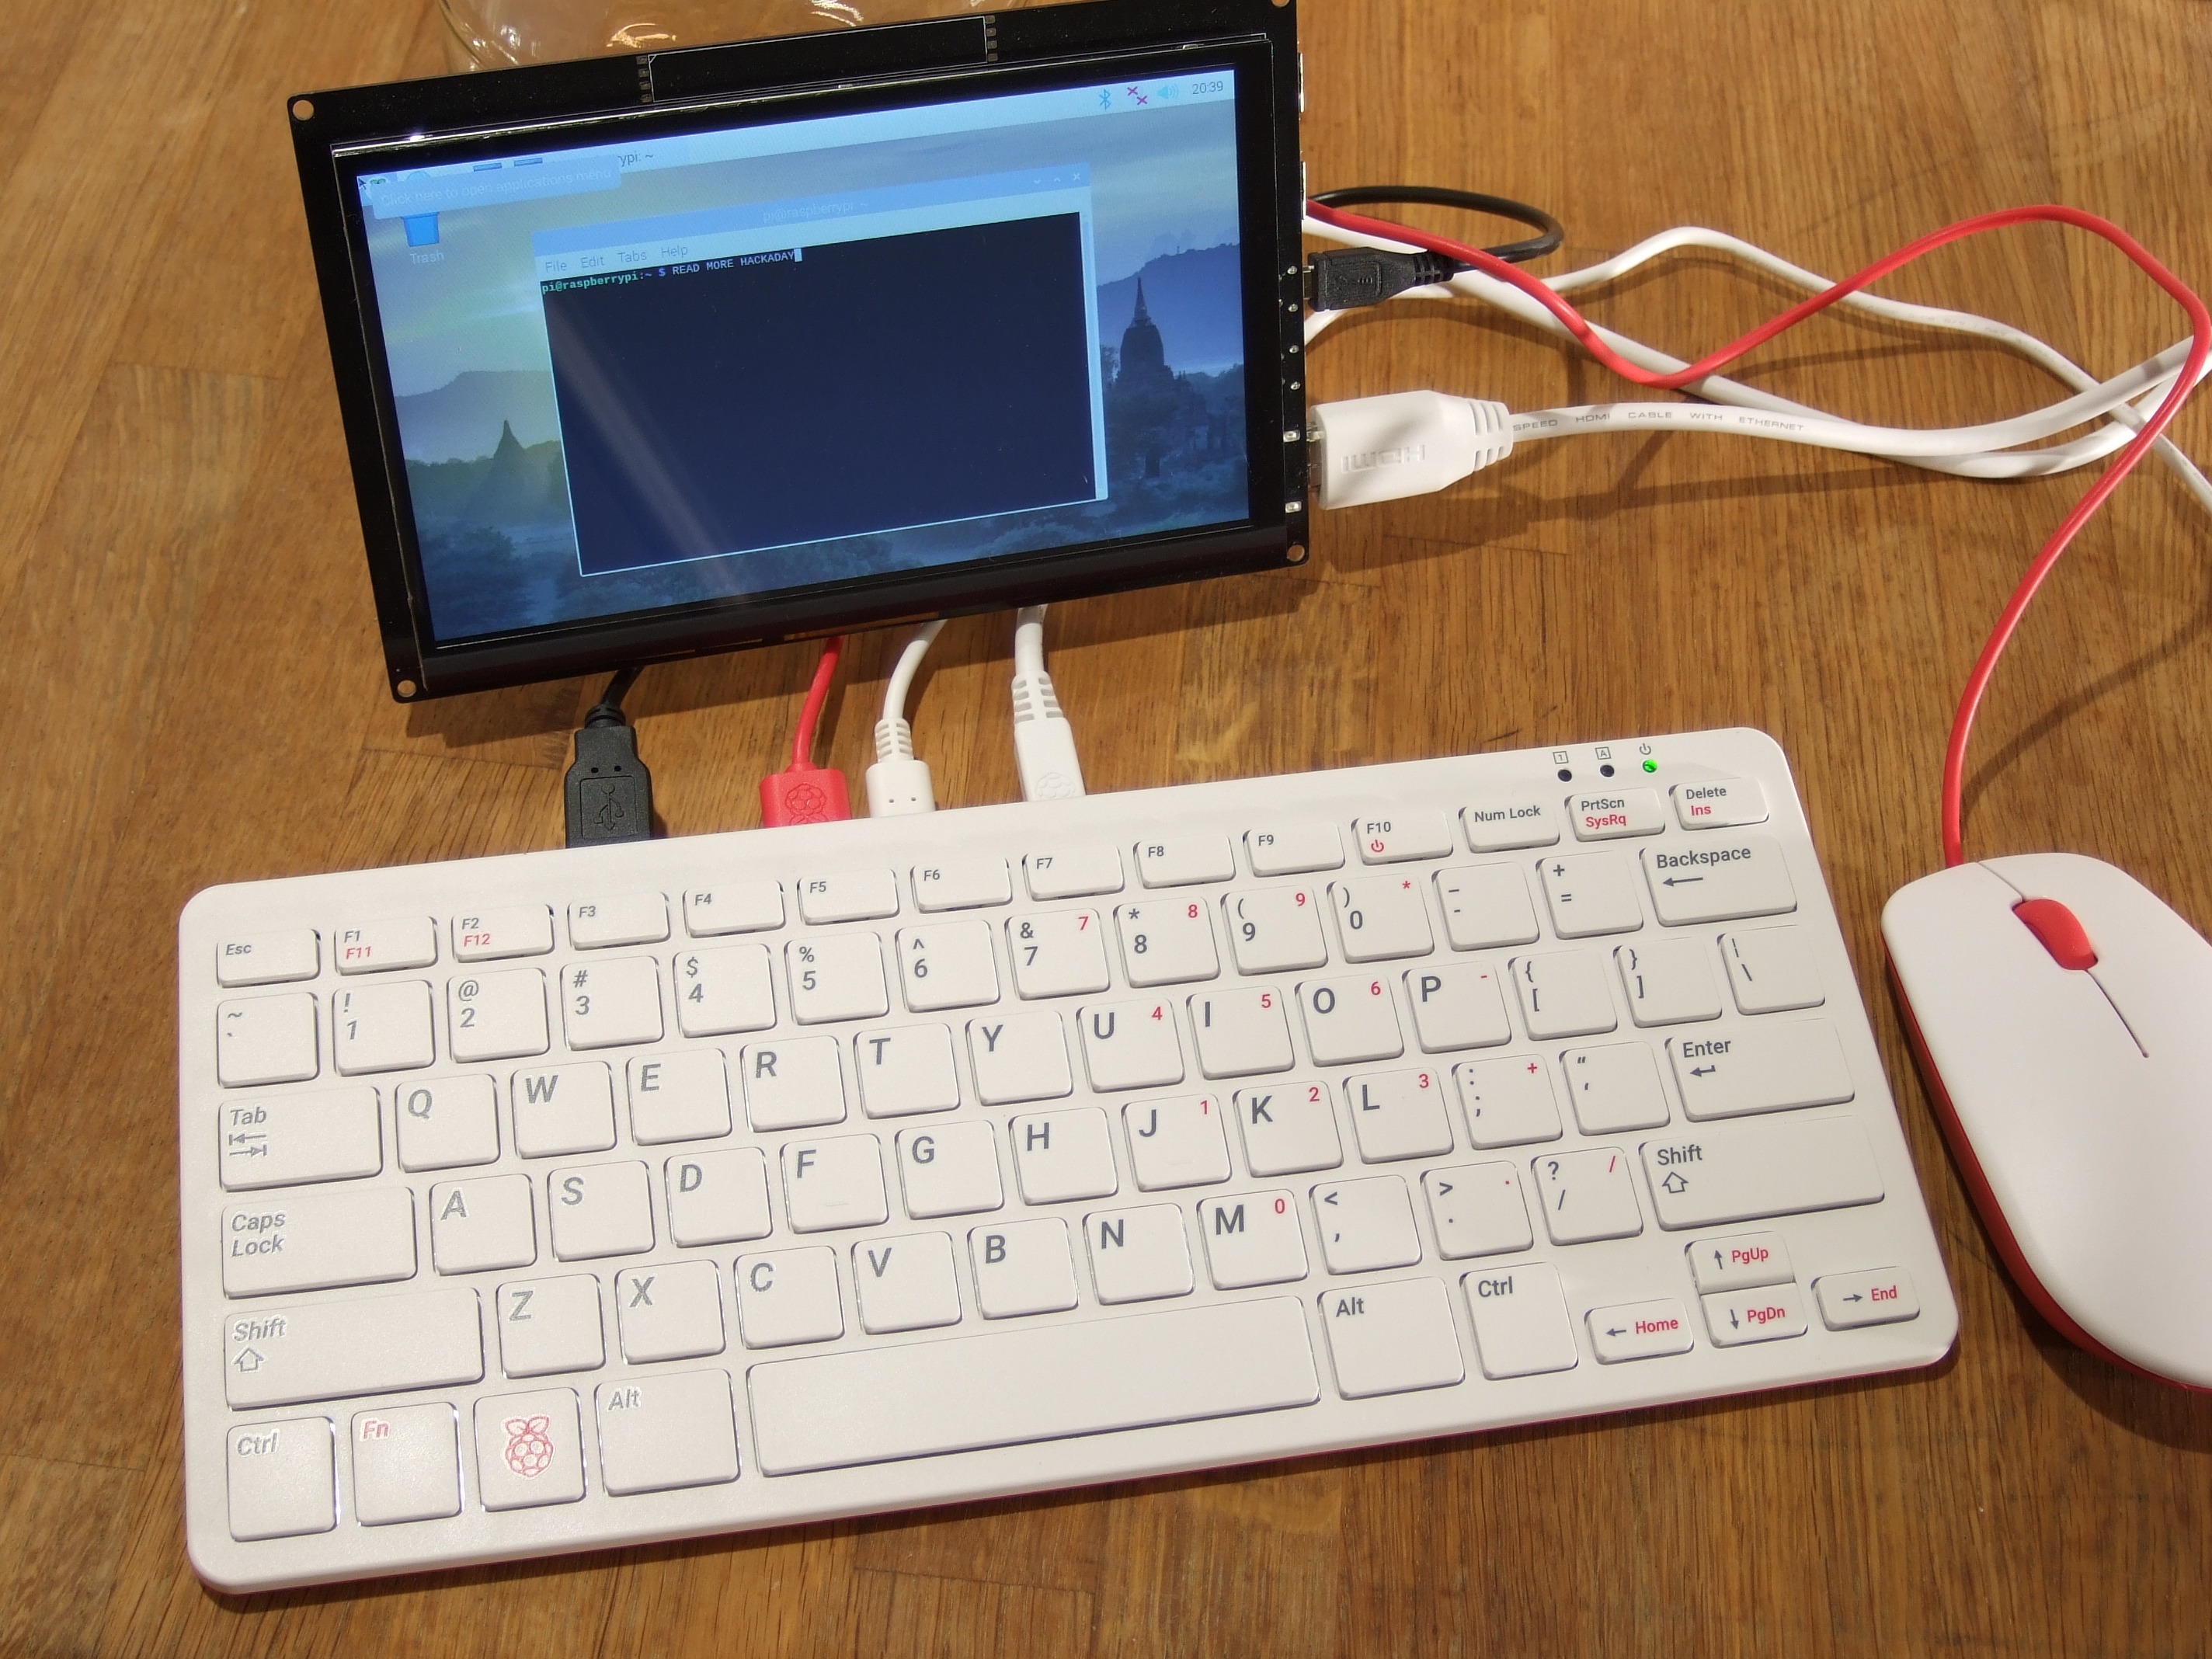 New Raspberry Pi 400 Is A Computer In A Keyboard For $70 | Hackaday